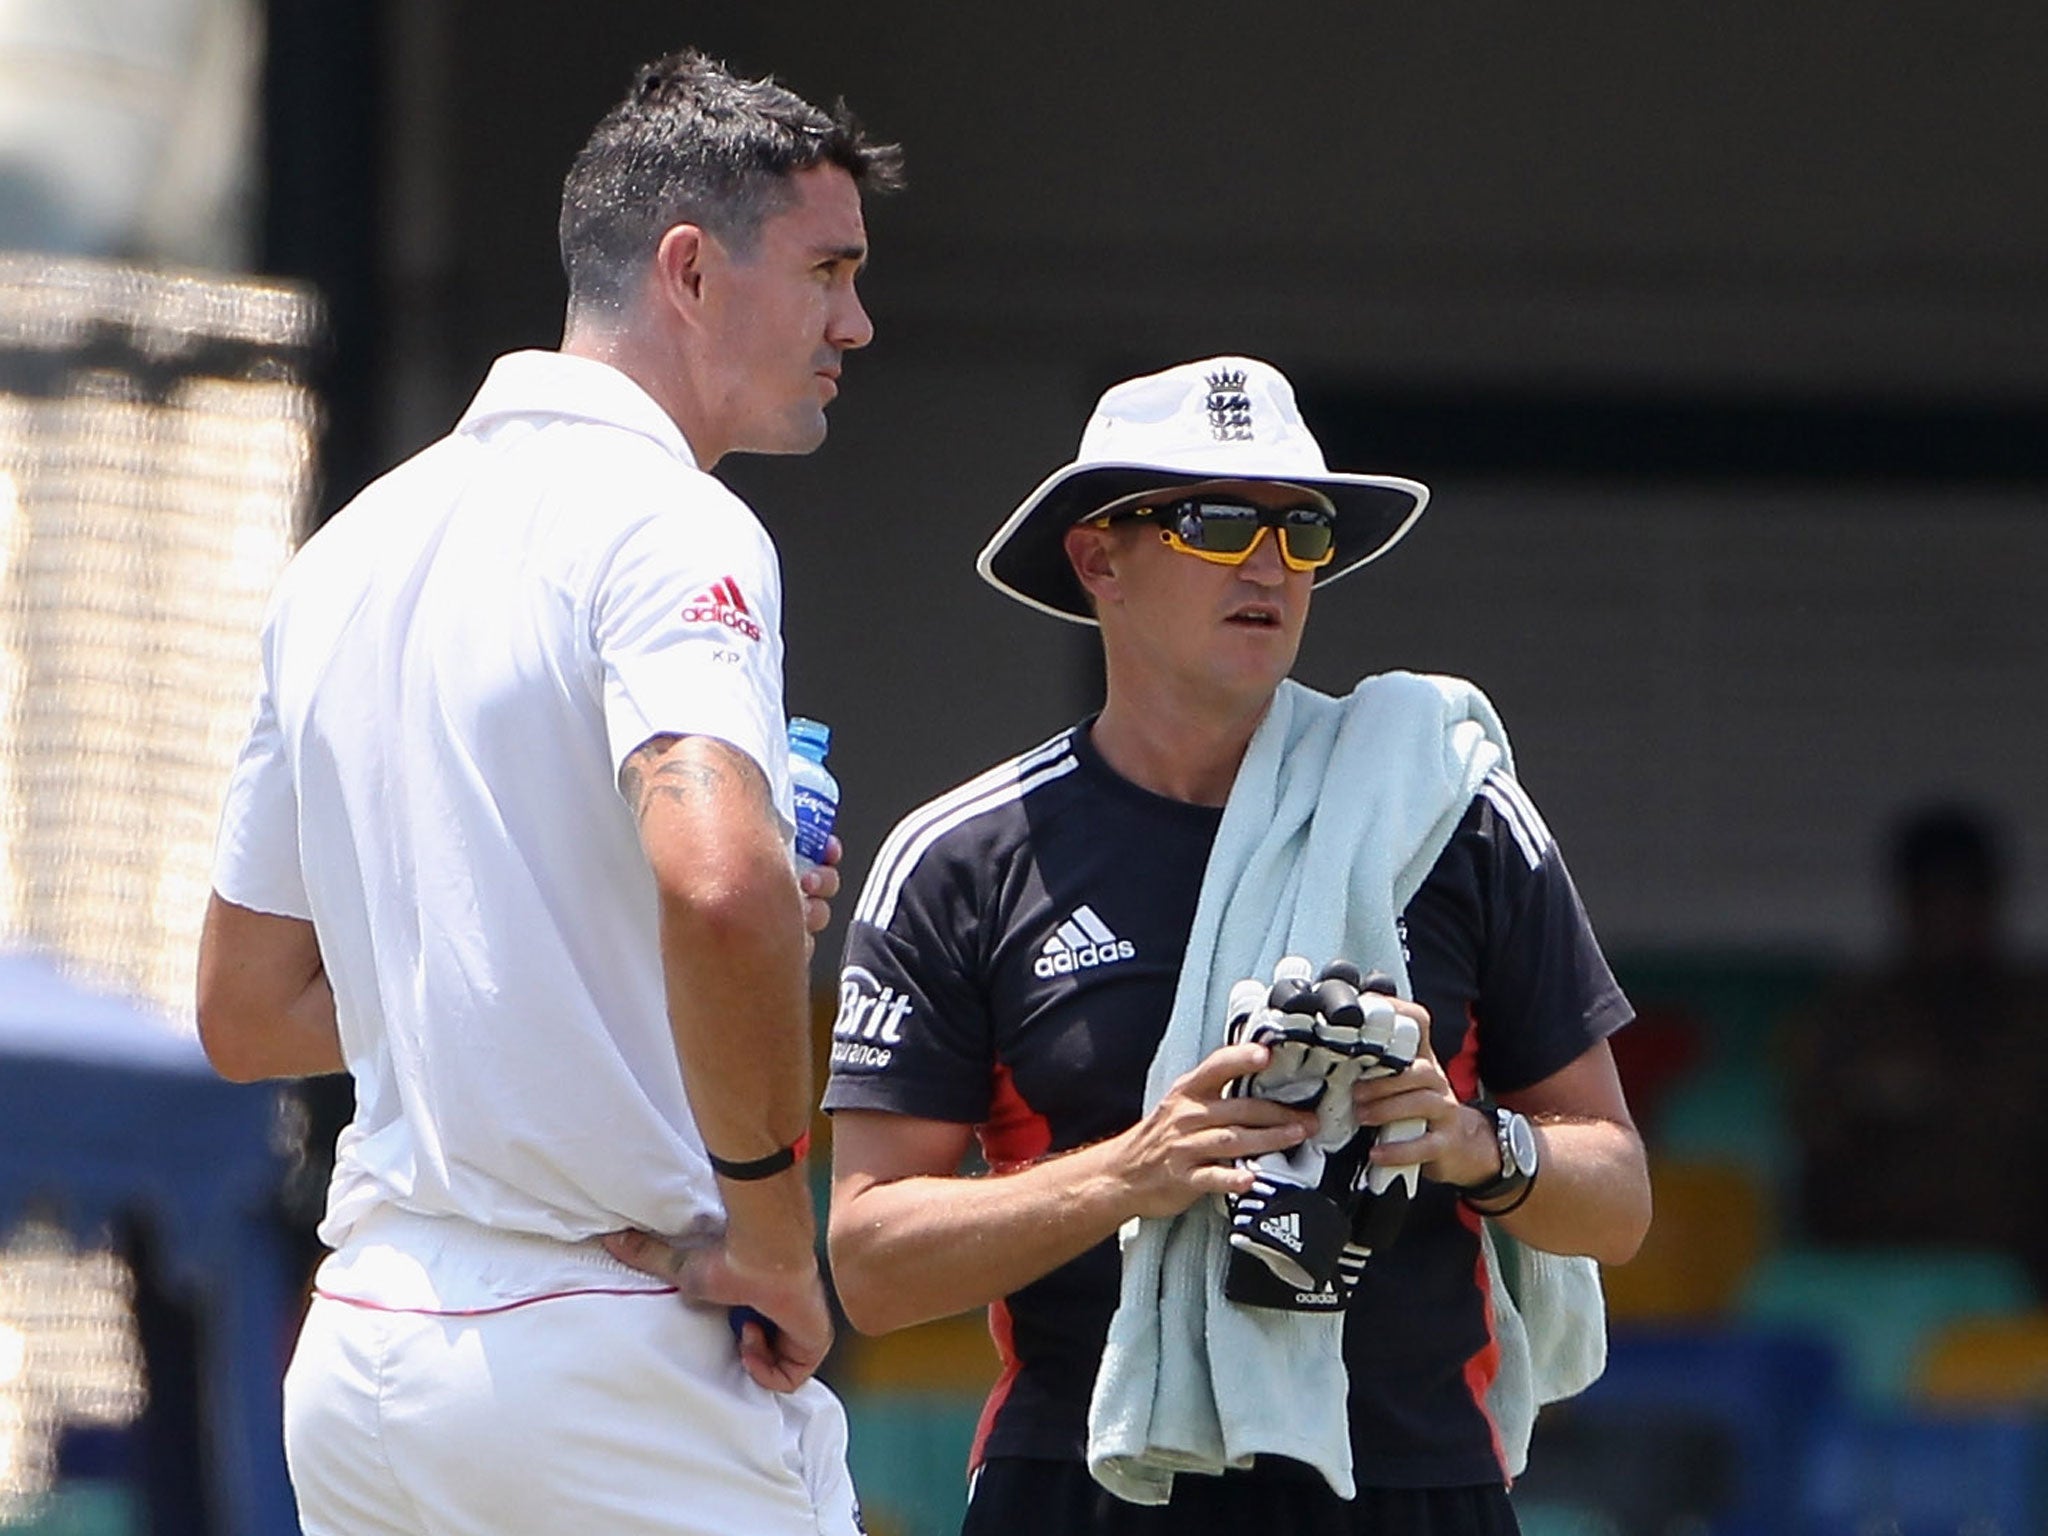 Andy Flower's poor relationship with Kevin Pietersen is not a cause of the team directors exit